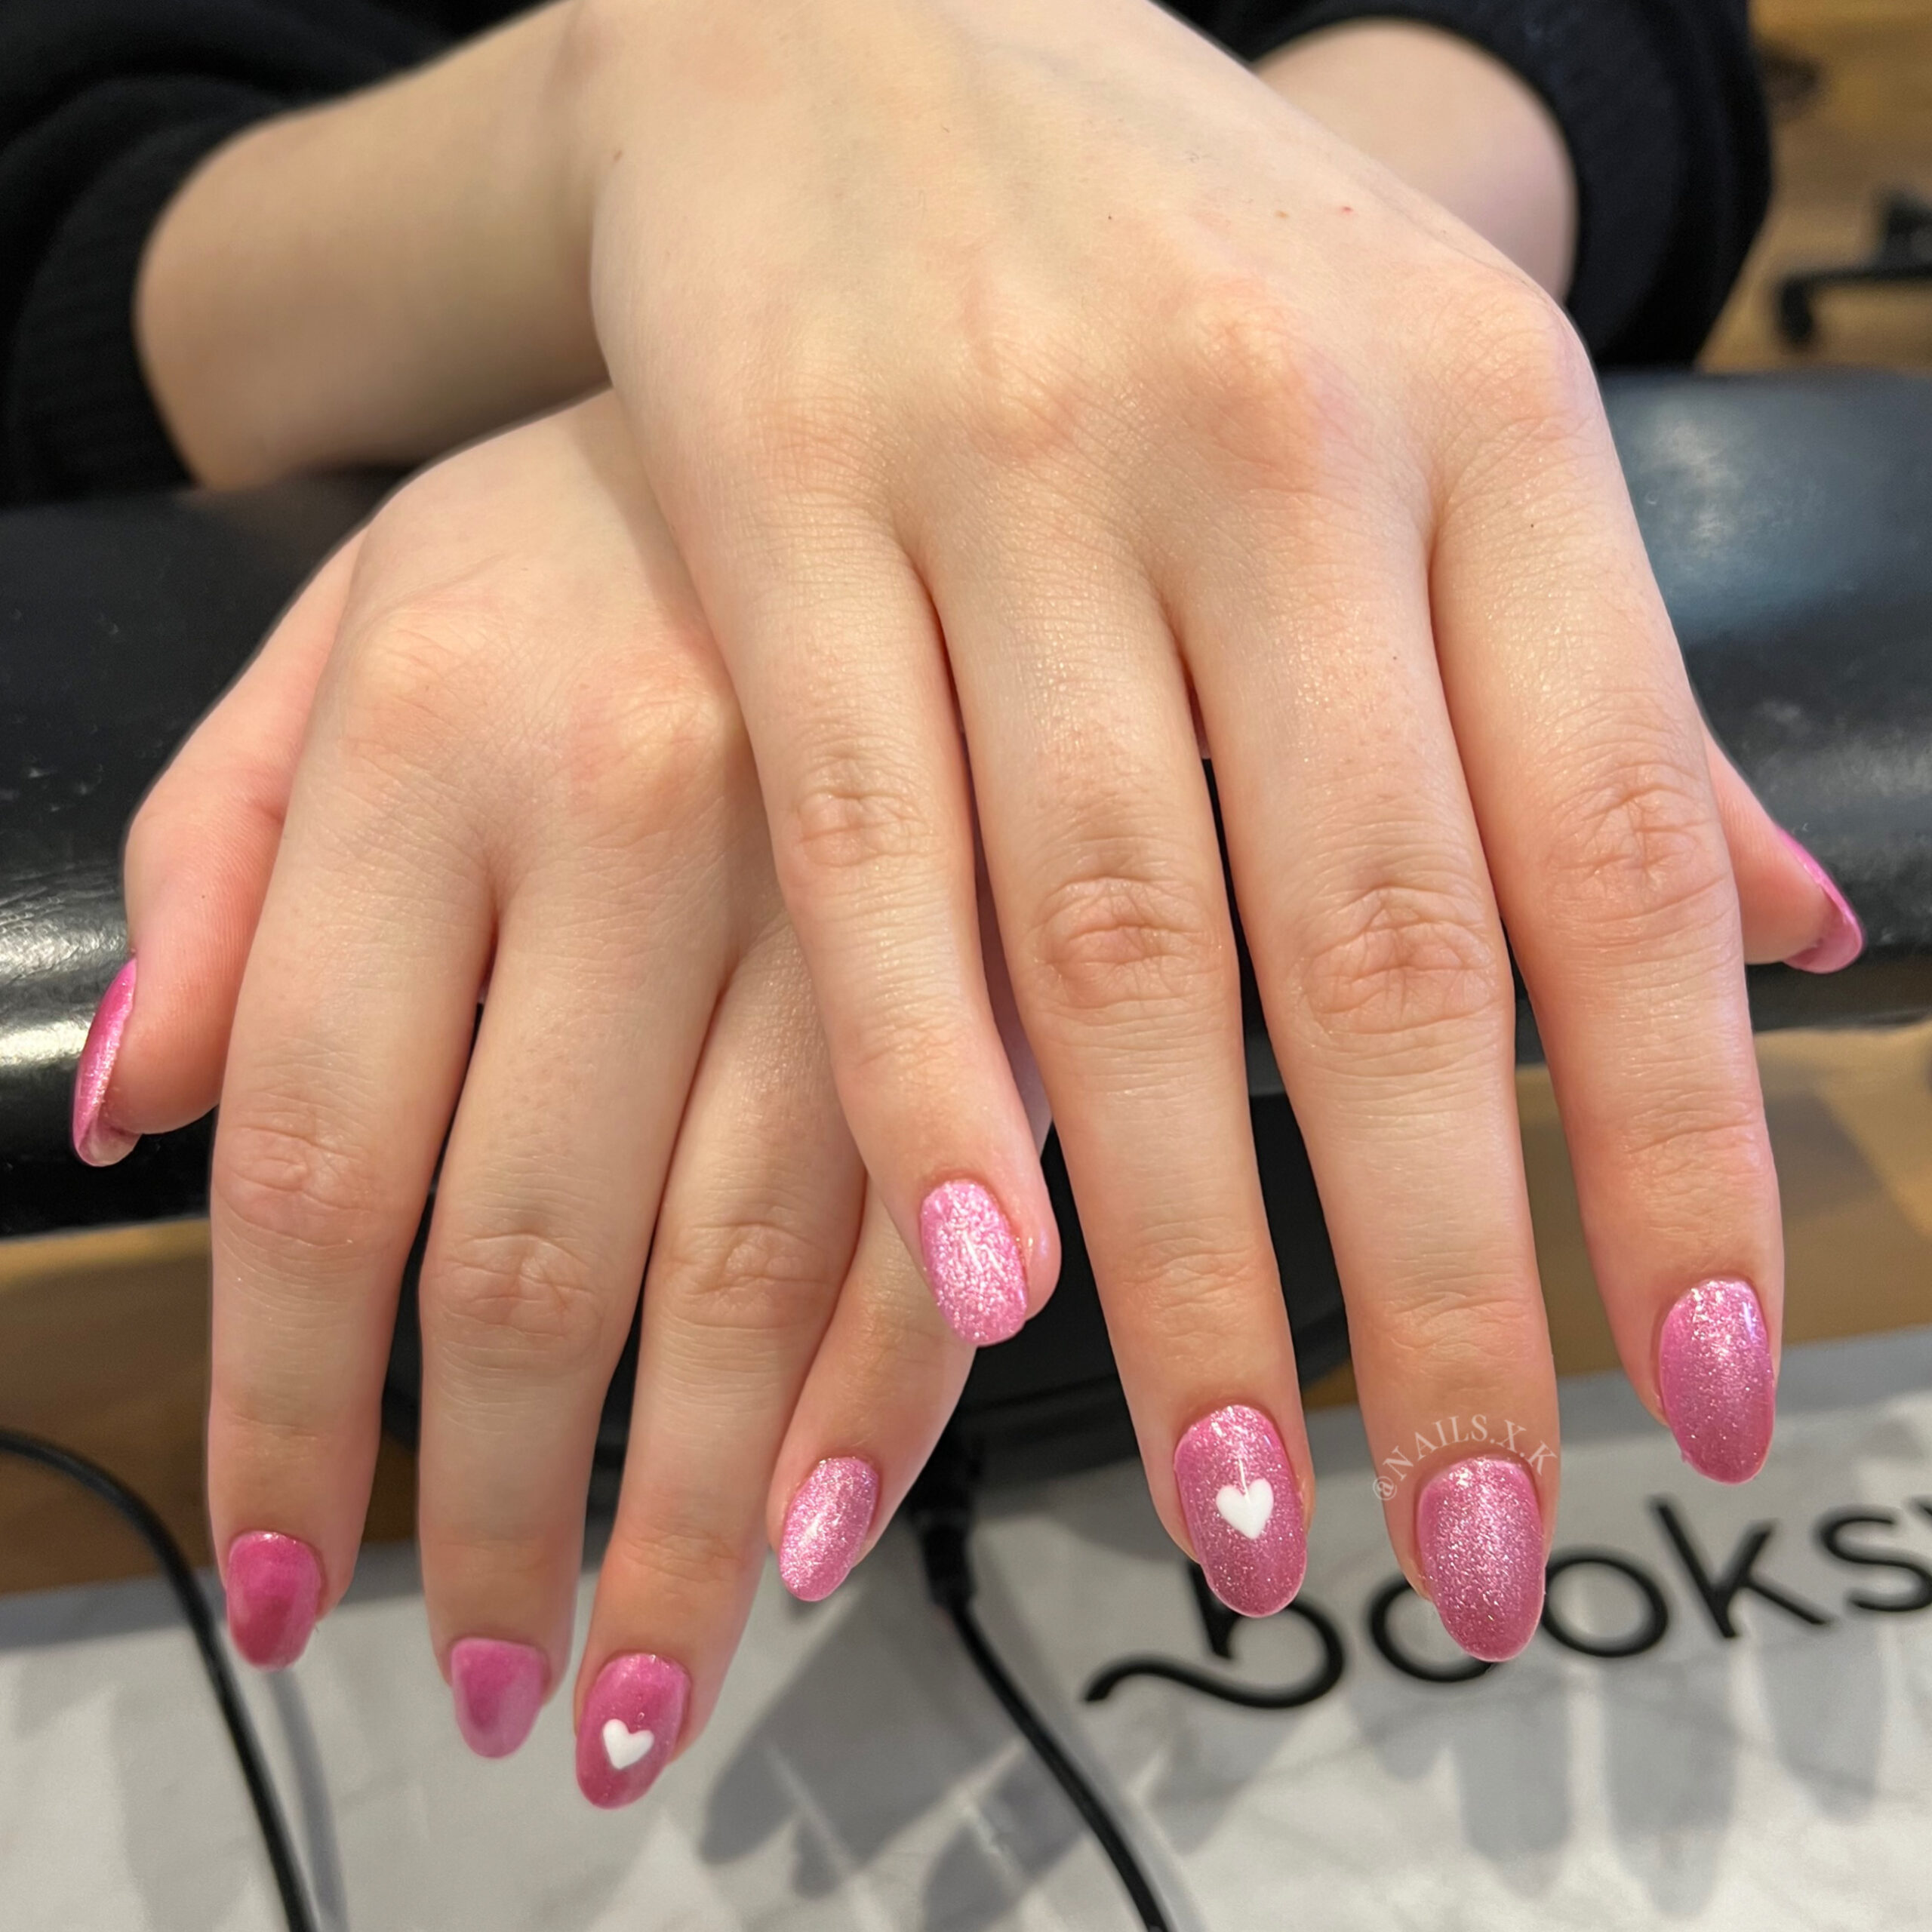 Acrylic nails with pink cat eye polish accented with white hand painted hearts. Nails by K